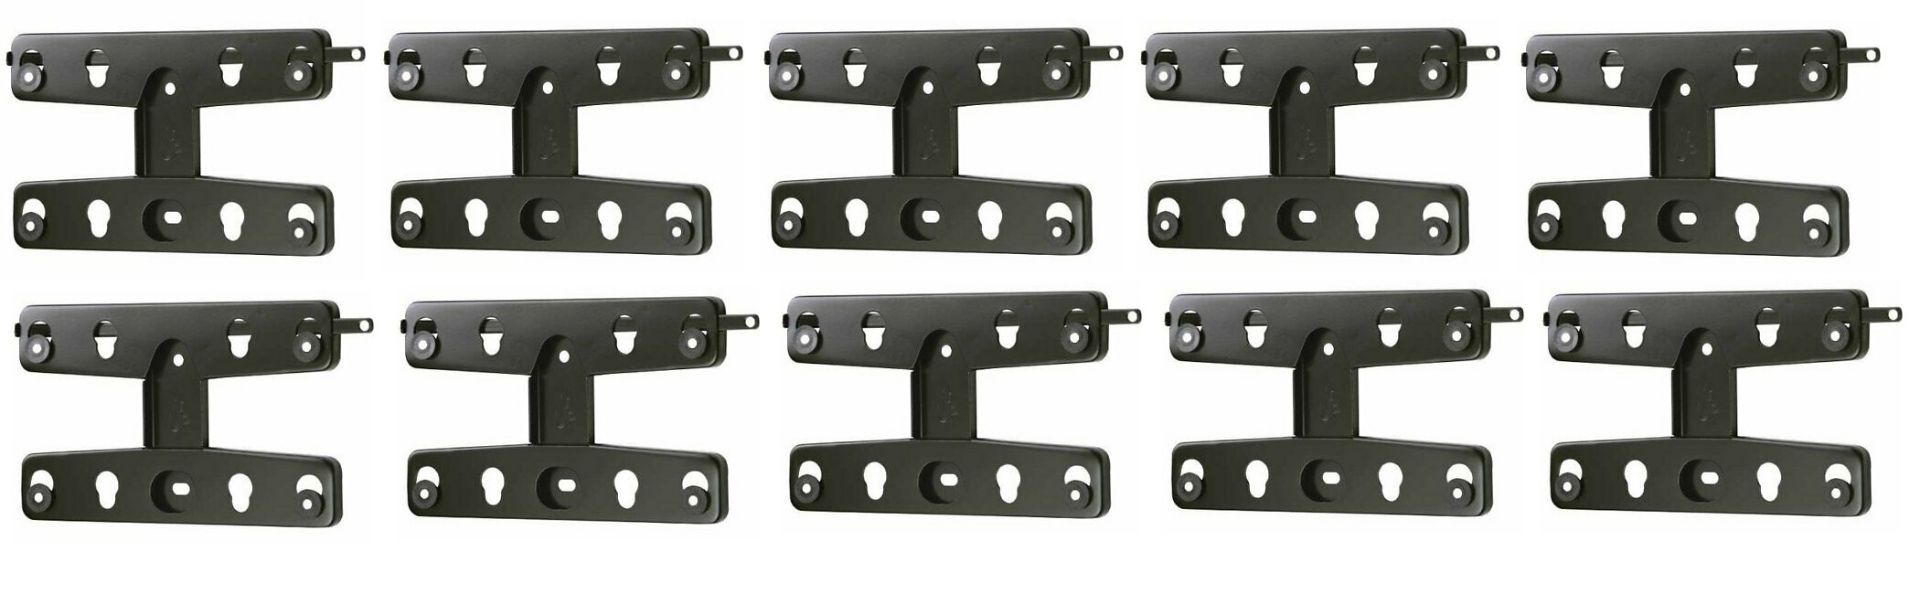 + VAT Brand New 10 Secura Low Profile Ultra Slim TV Wall Mounts For Models 13"-26" - Online Price £